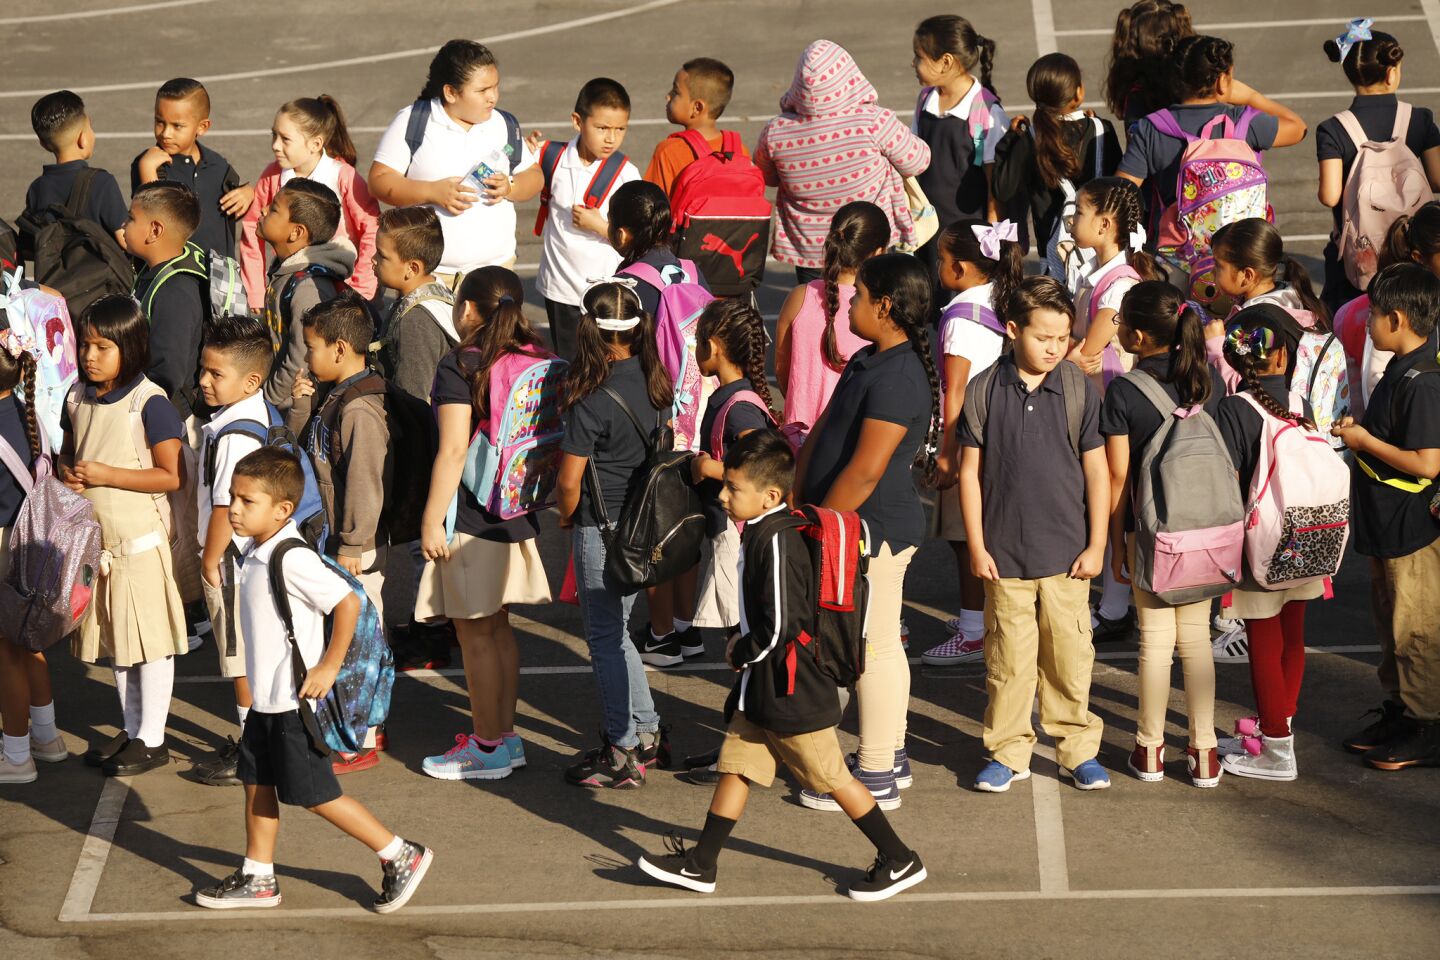 It's back to school for L.A. Unified